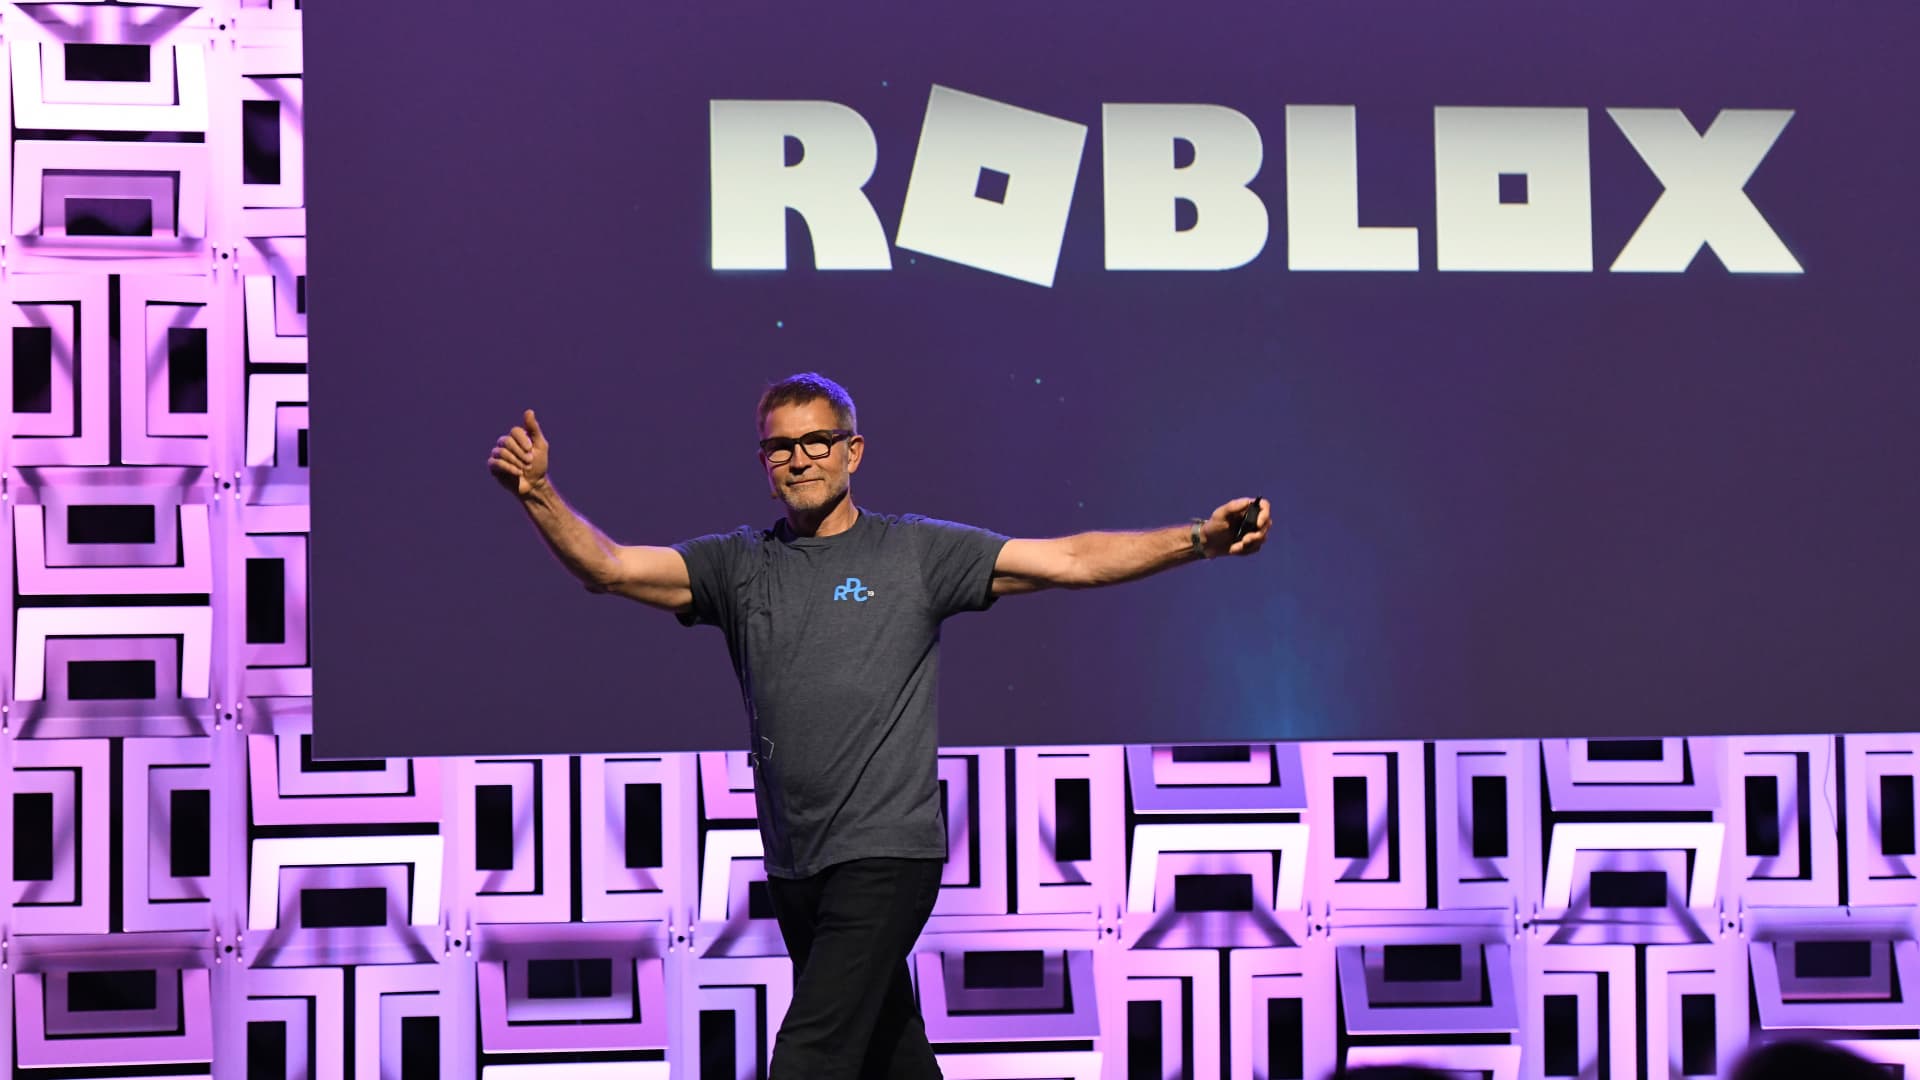 Roblox CEO says April bookings are starting to turn around after a difficult March